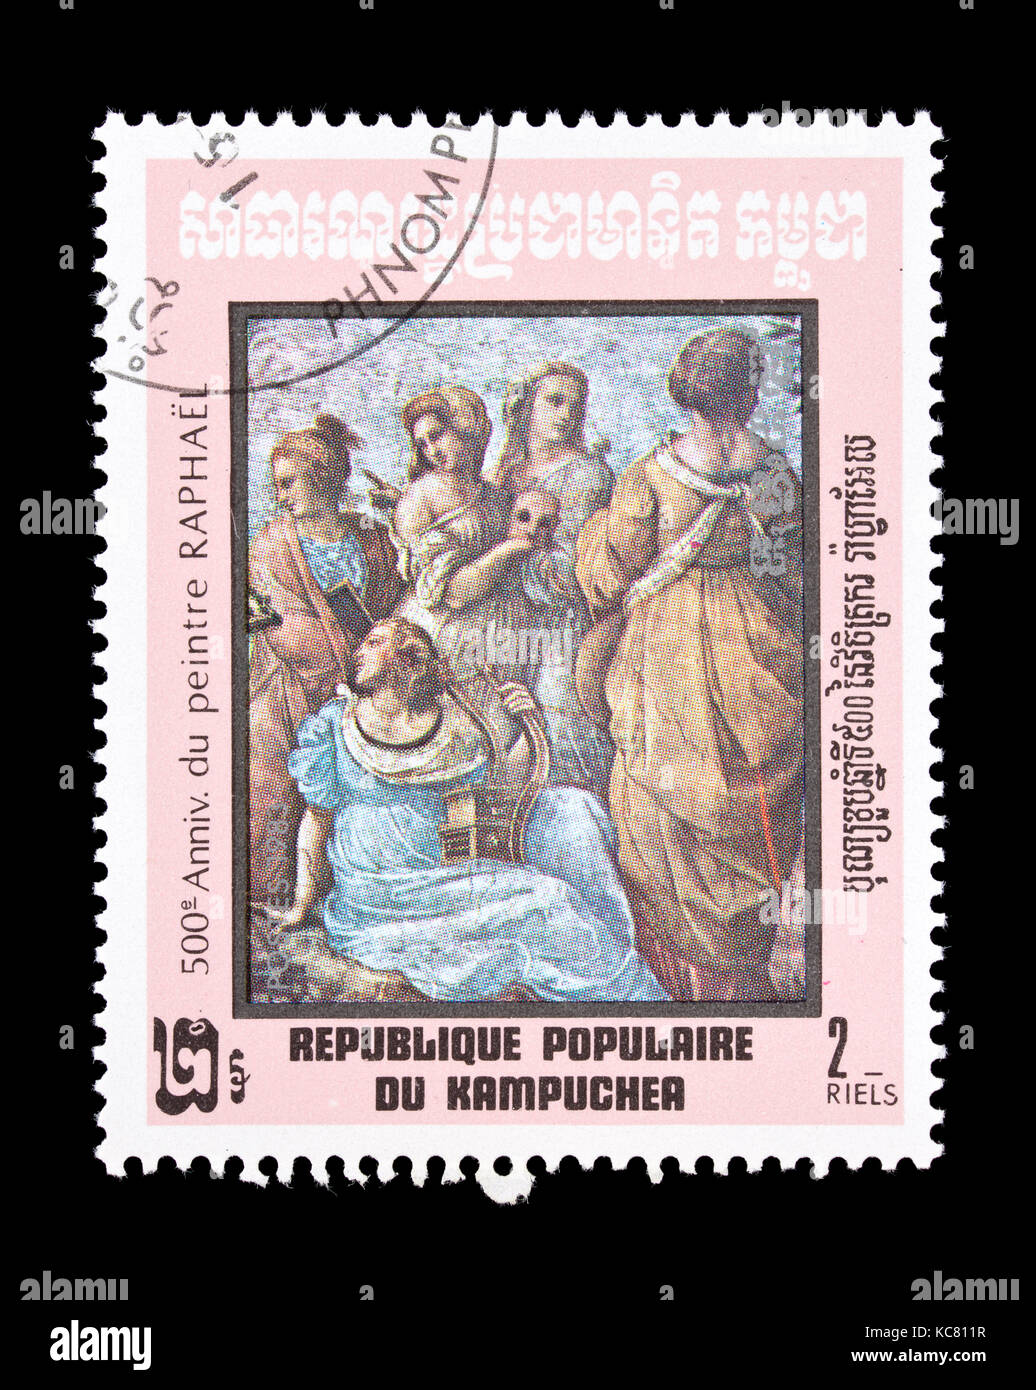 POstage stamp from Cambodia (Kampuchea) depicting the Raphael painting 'The Muses', 500'th anniversary of birth. Stock Photo